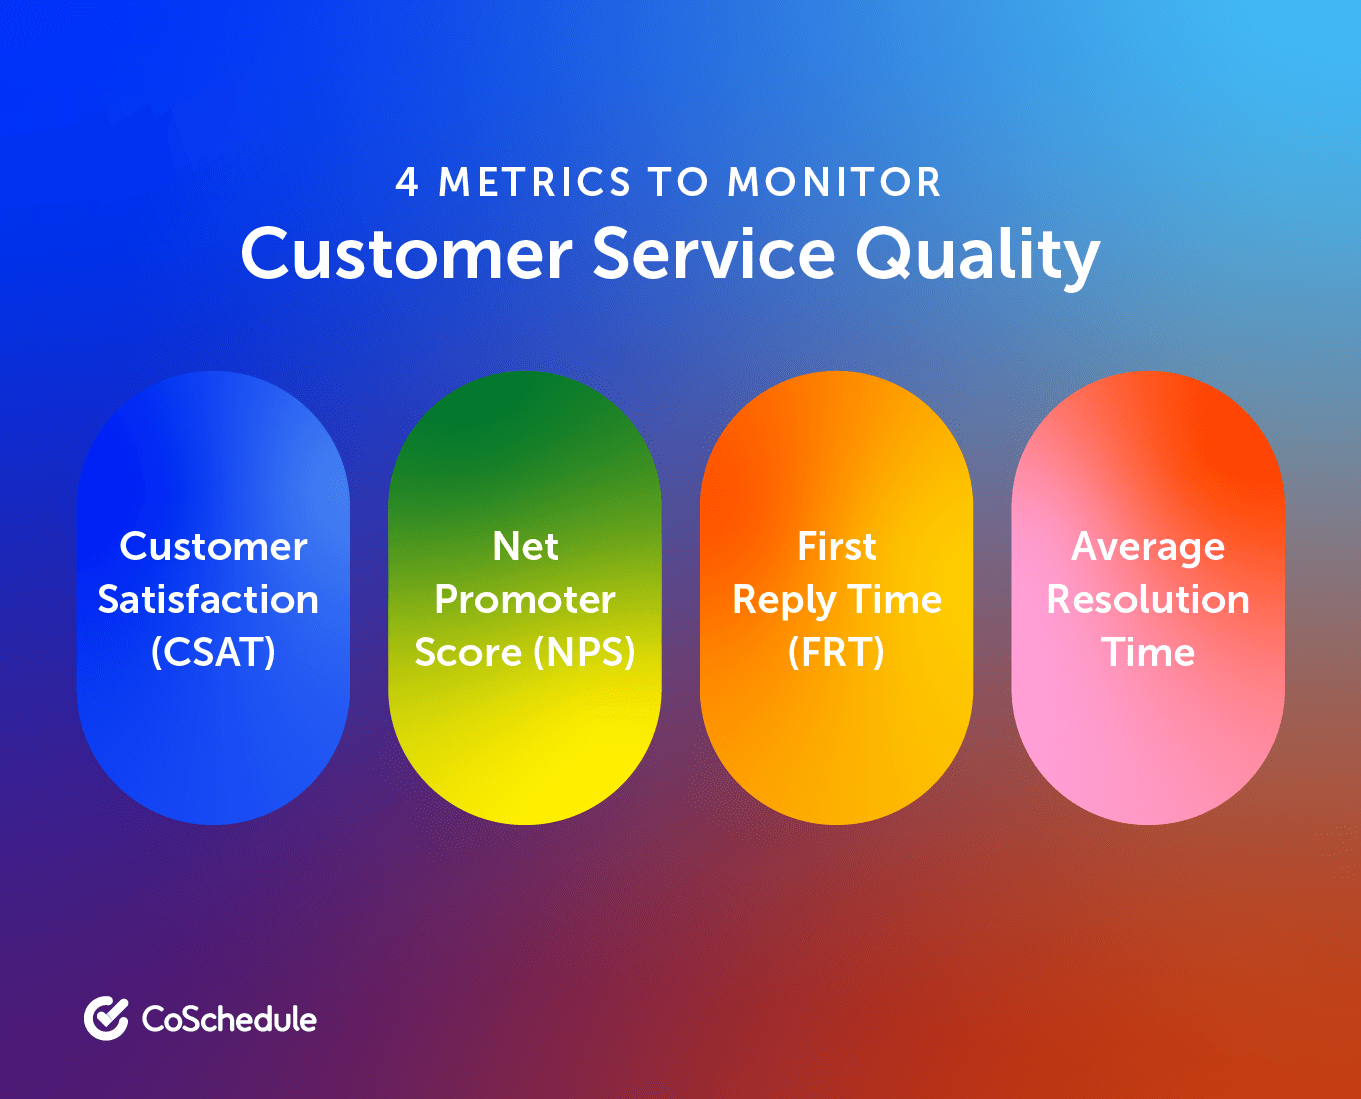 CoSchedule presents the four metrics to monitor customer service quality which include customer satisfaction, not promoter score, first reply time, and average resolution time.